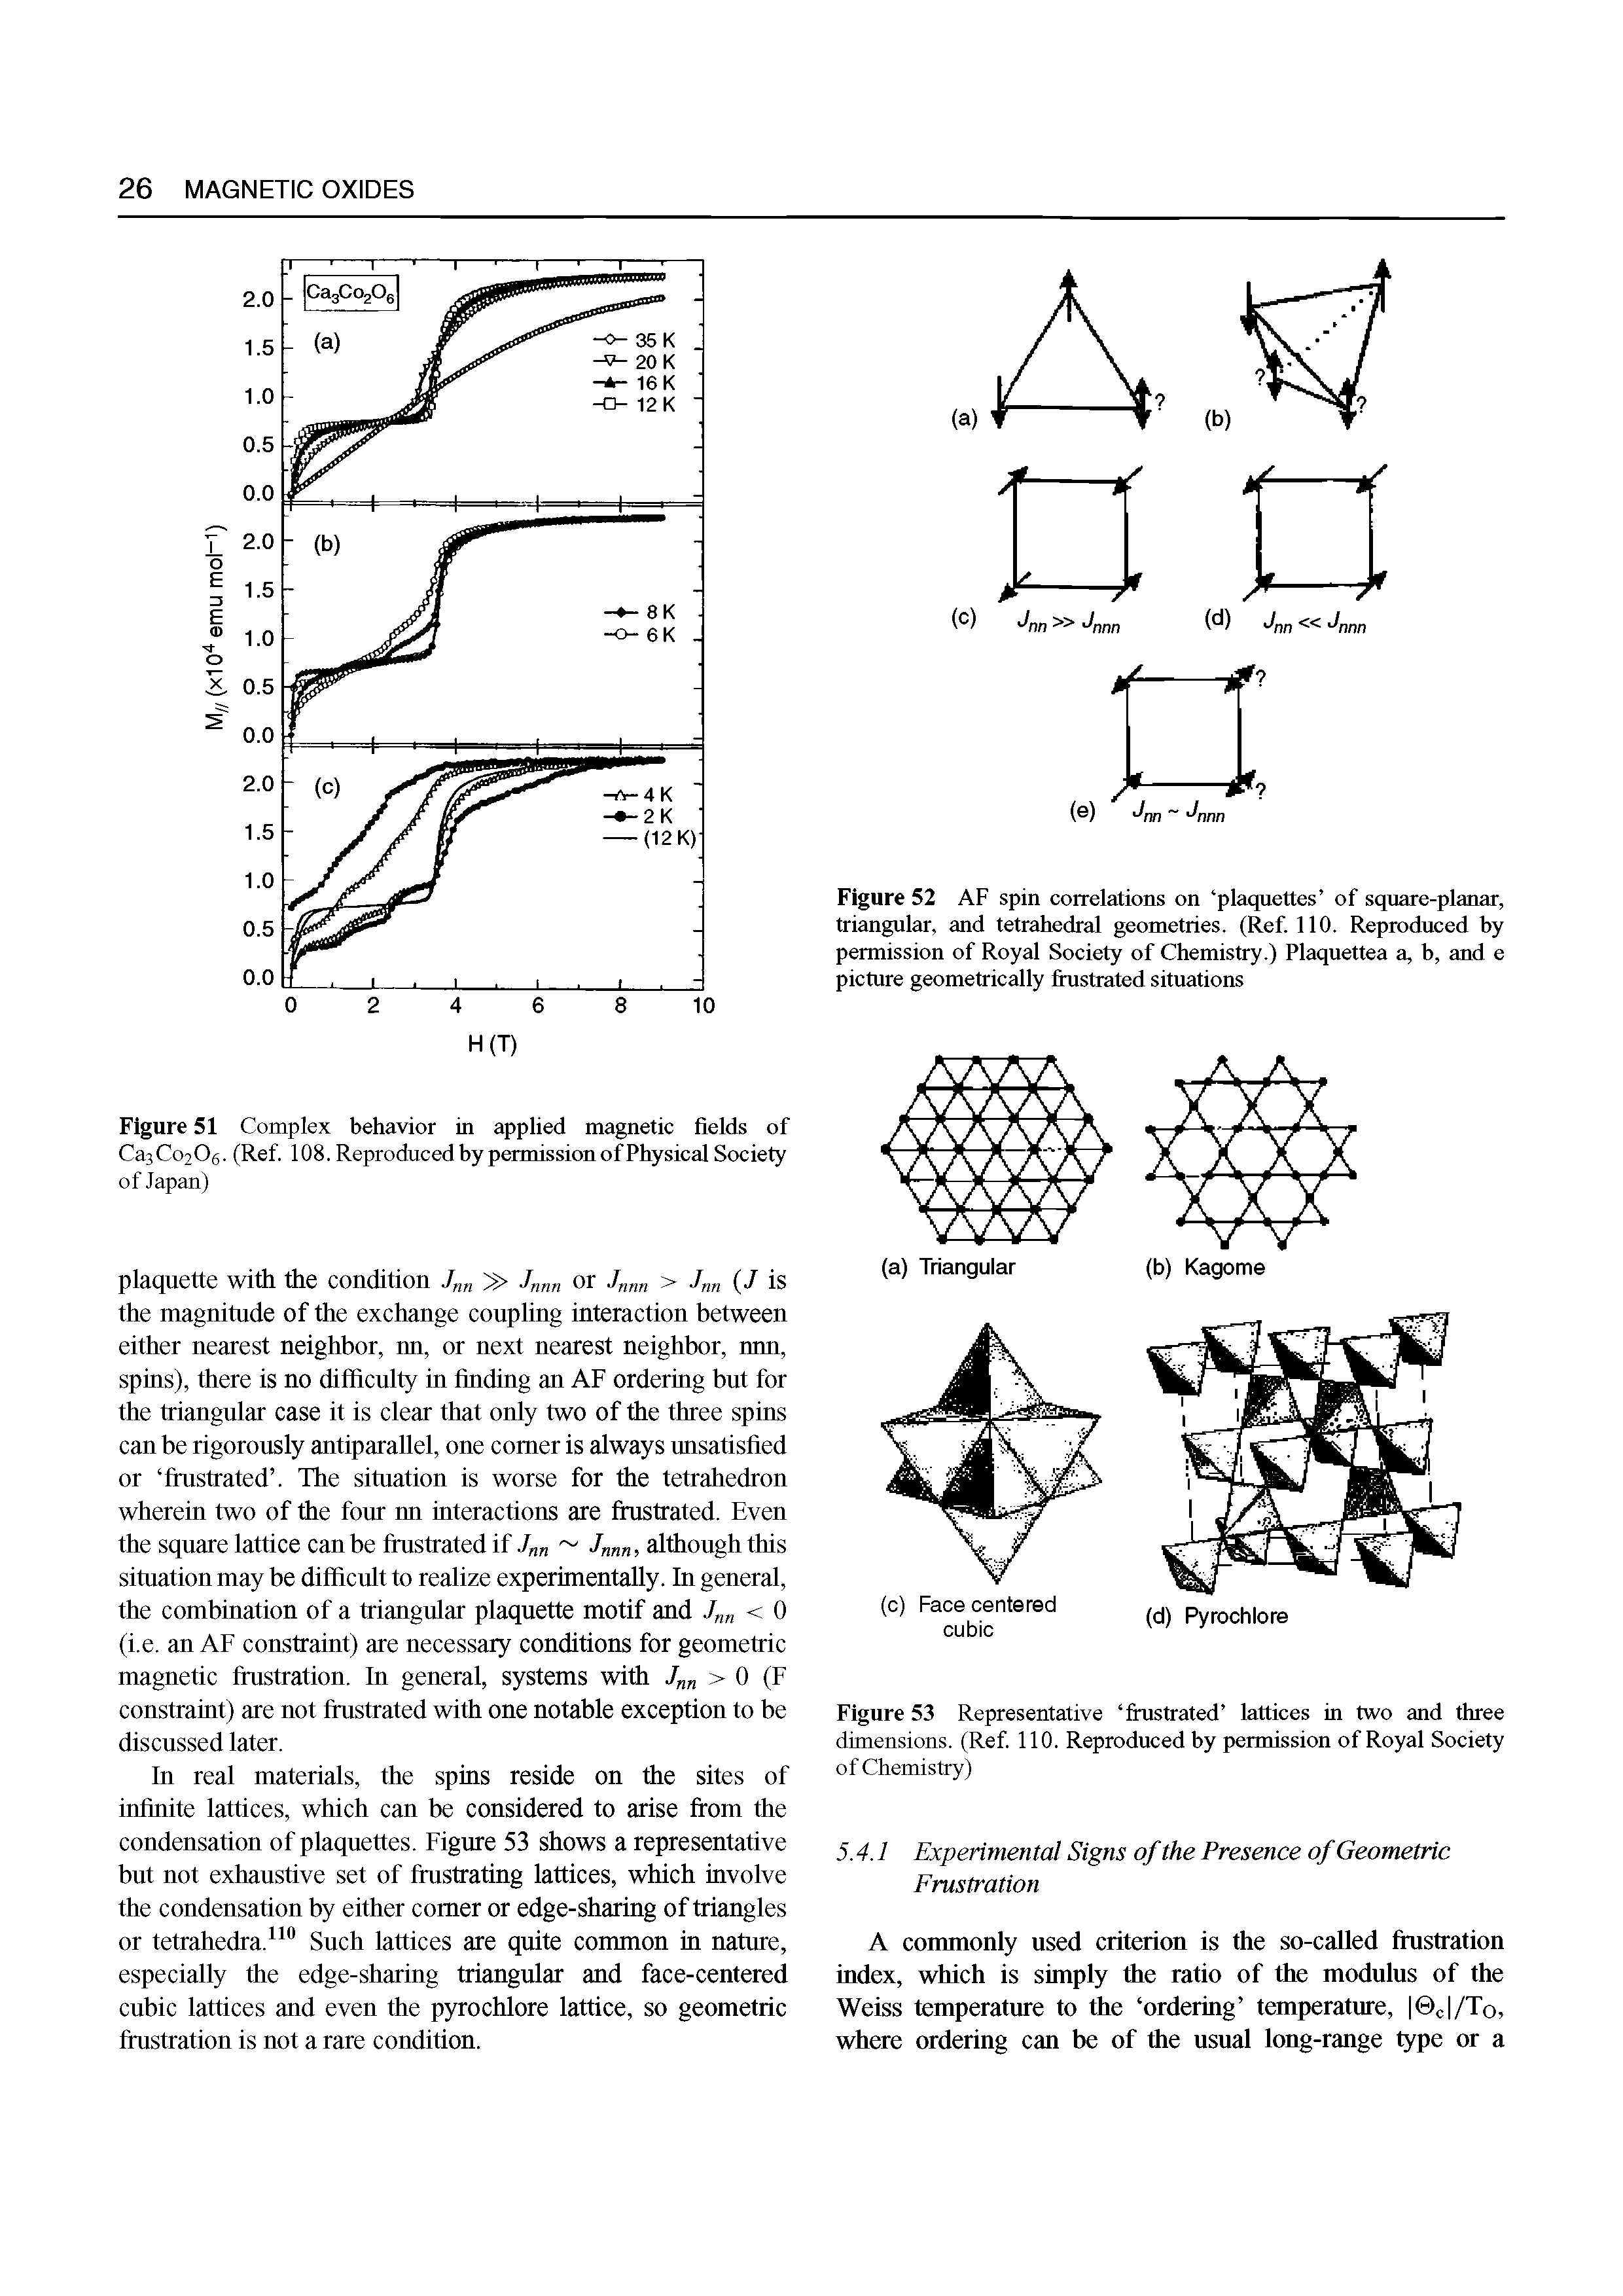 Figure 52 AF spin correlations on plaquettes of square-planar, triangular, and tetrahedral geometries. (Ref 110. Reproduced by permission of Royal Society of Chemistry.) Plaquettea a, h, and e picmre geometrically frustrated situations...